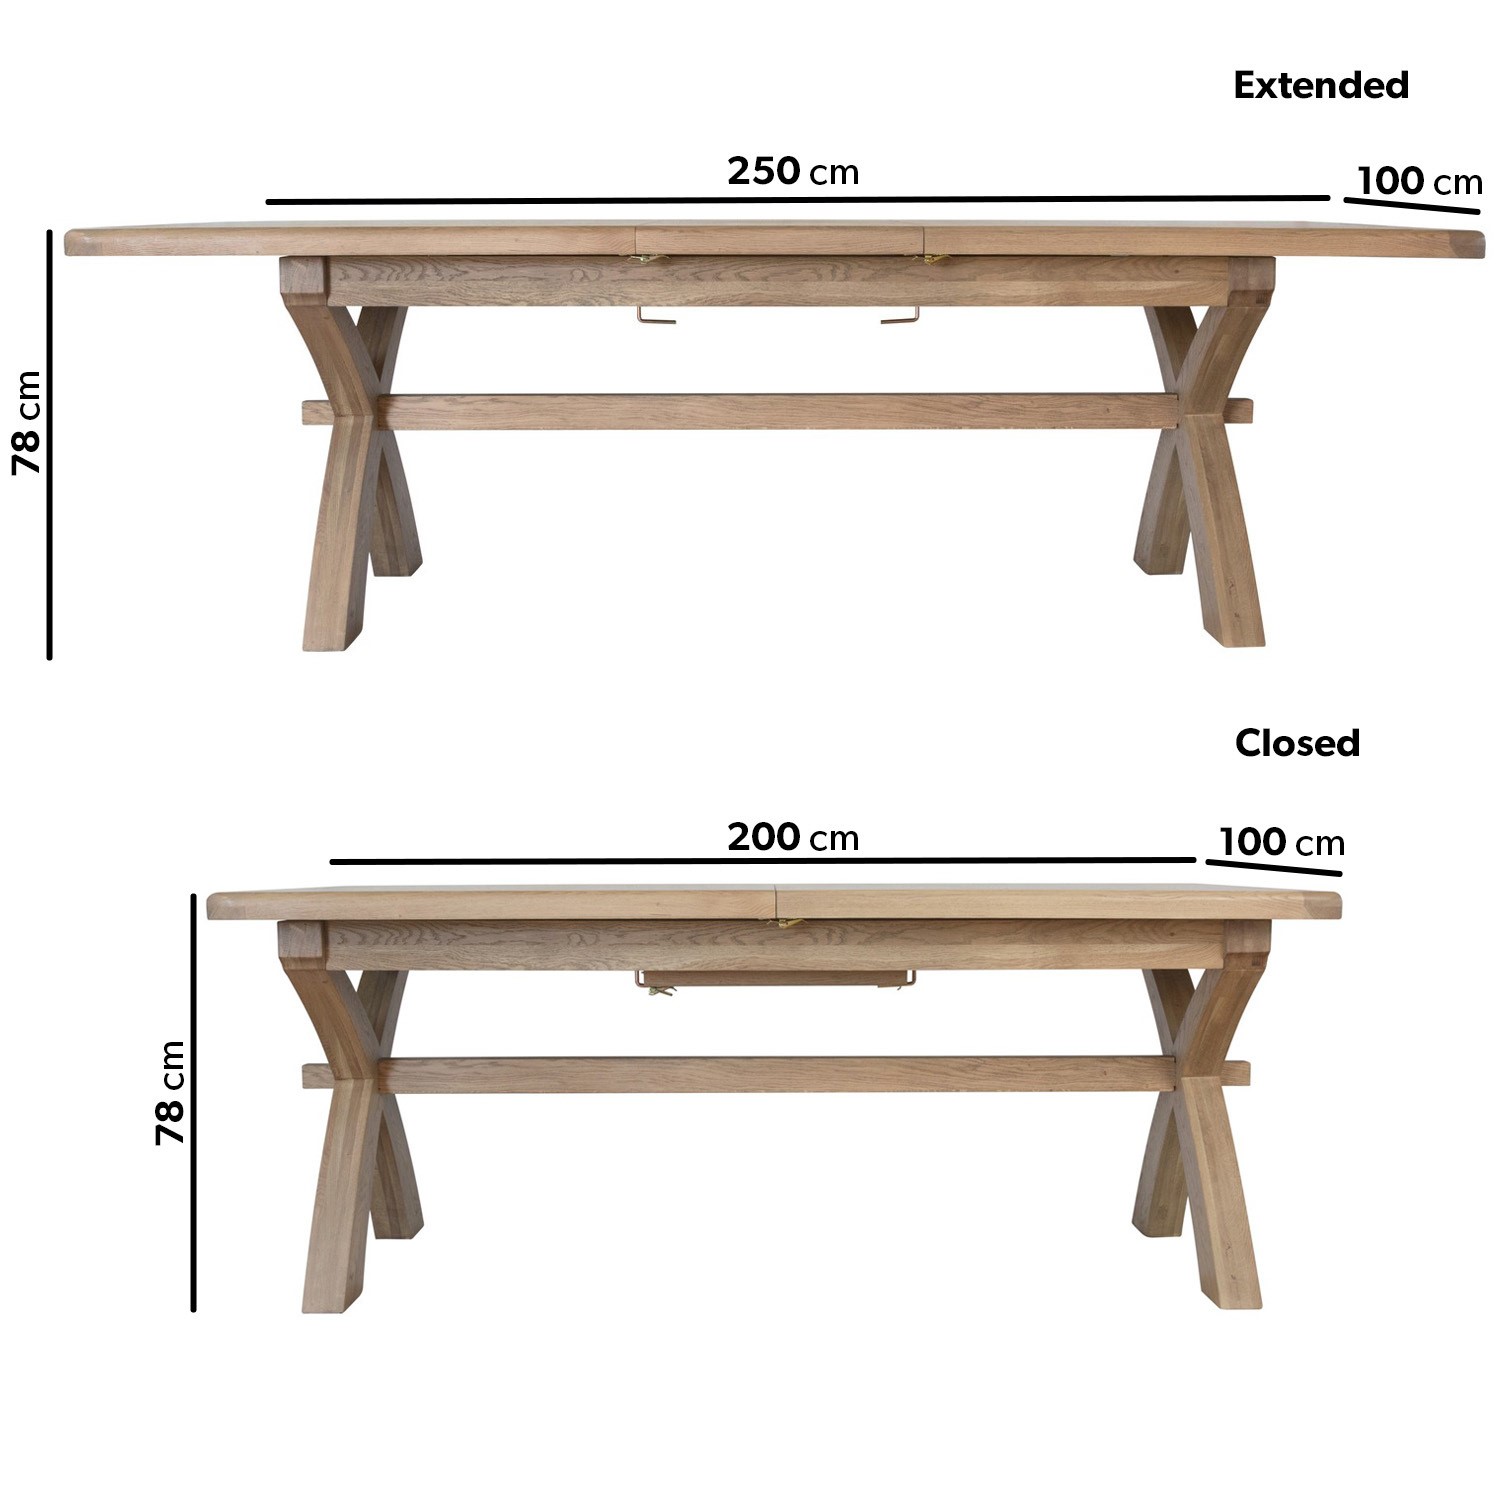 Read more about Extendable oak refectory table seats 10 wickerman